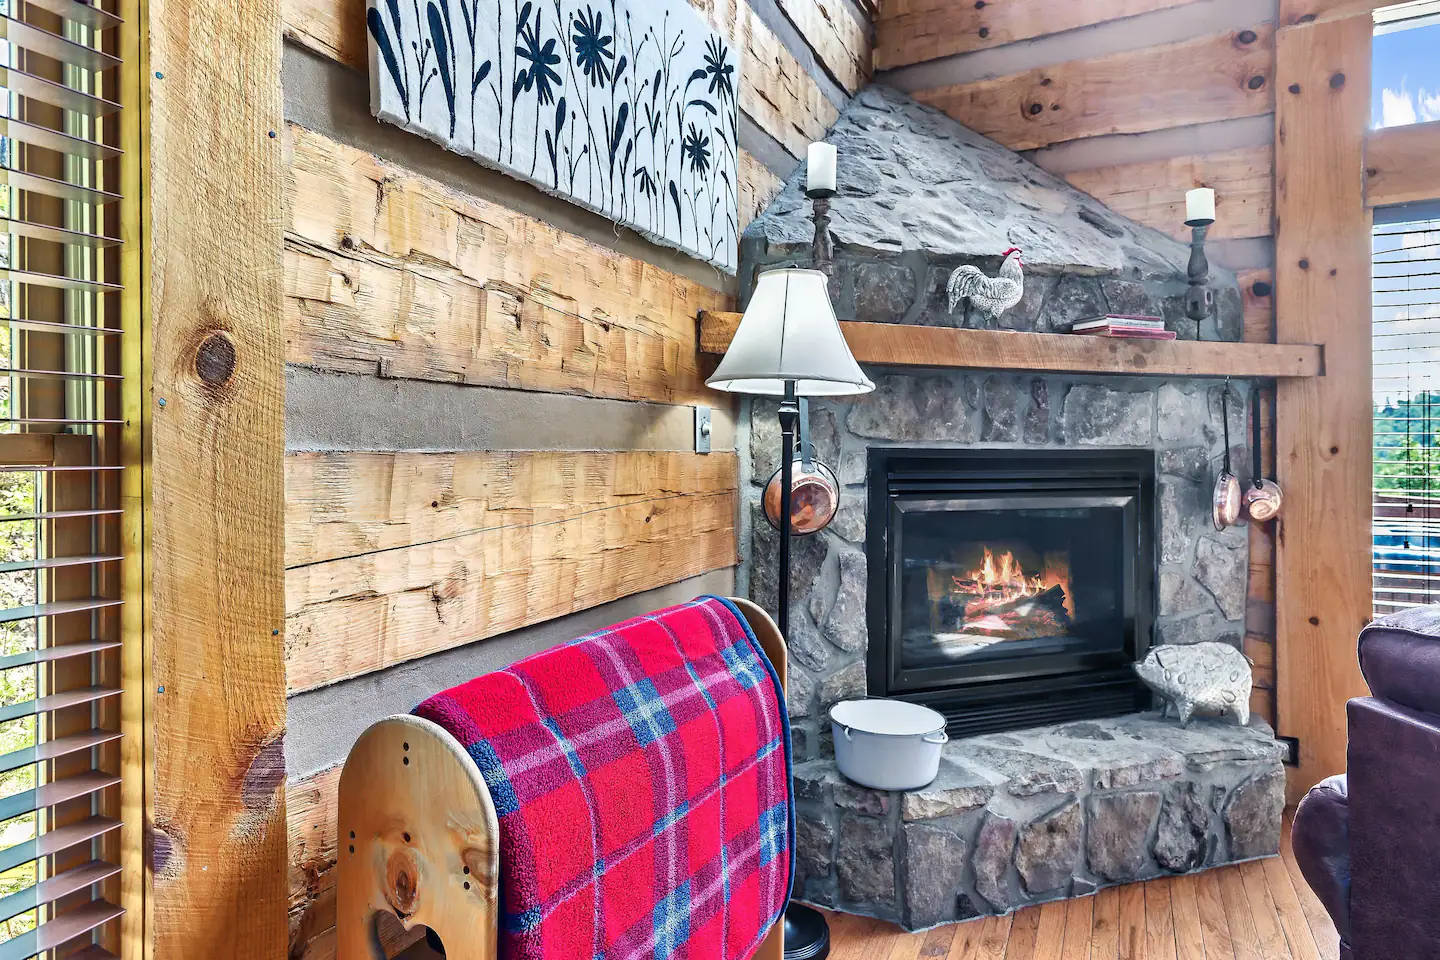 Snuggle under the fireplace.